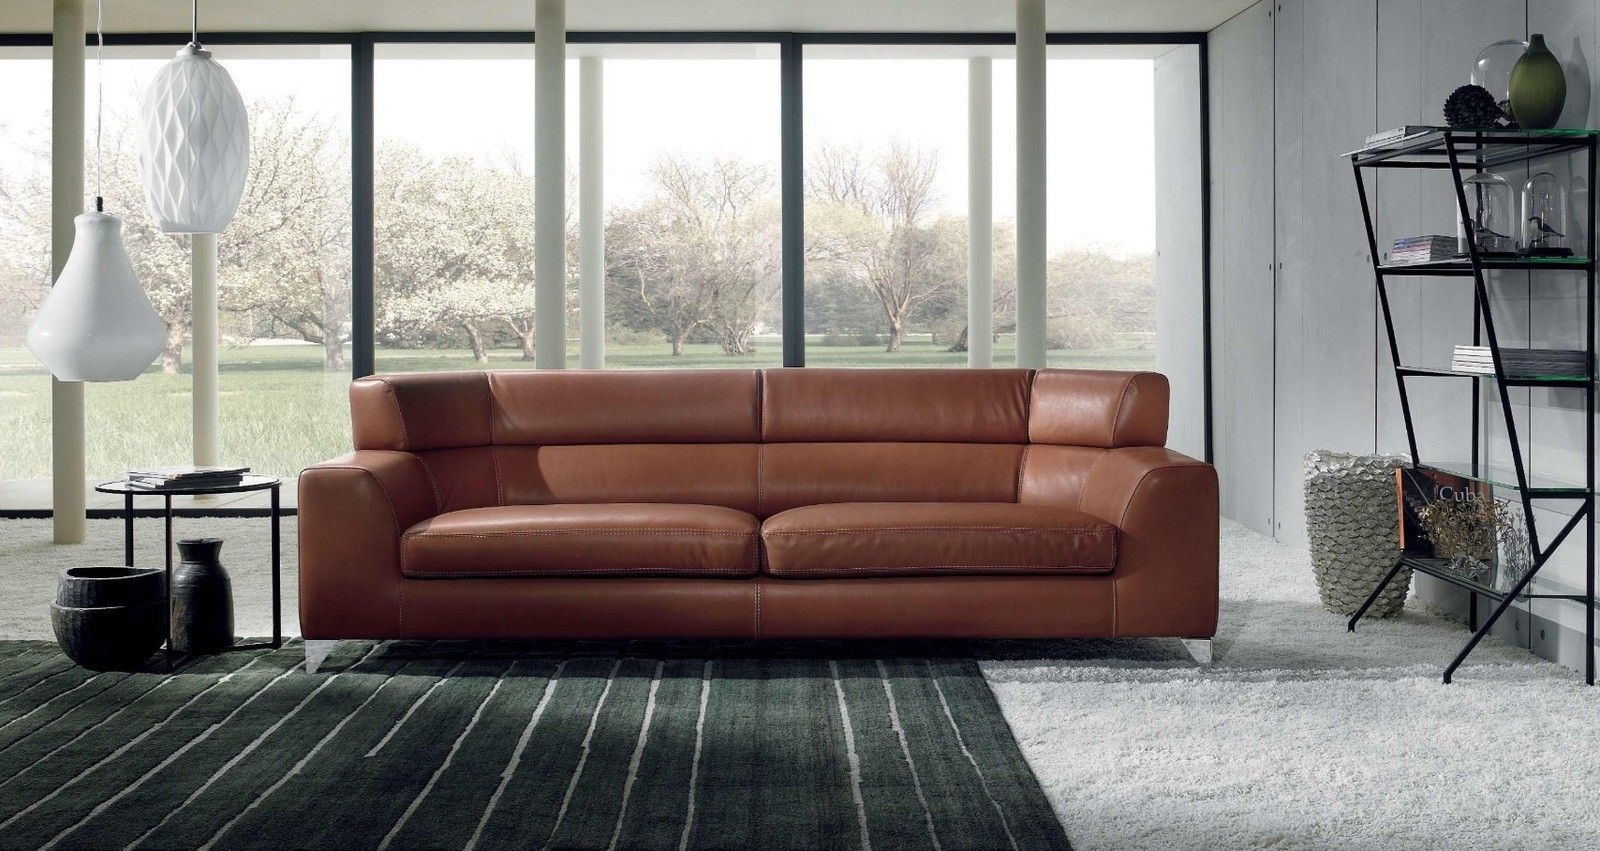 Sofás Ámbar Muebles, Ámbar Muebles Ámbar Muebles Moderne woonkamers Sofa's & fauteuils